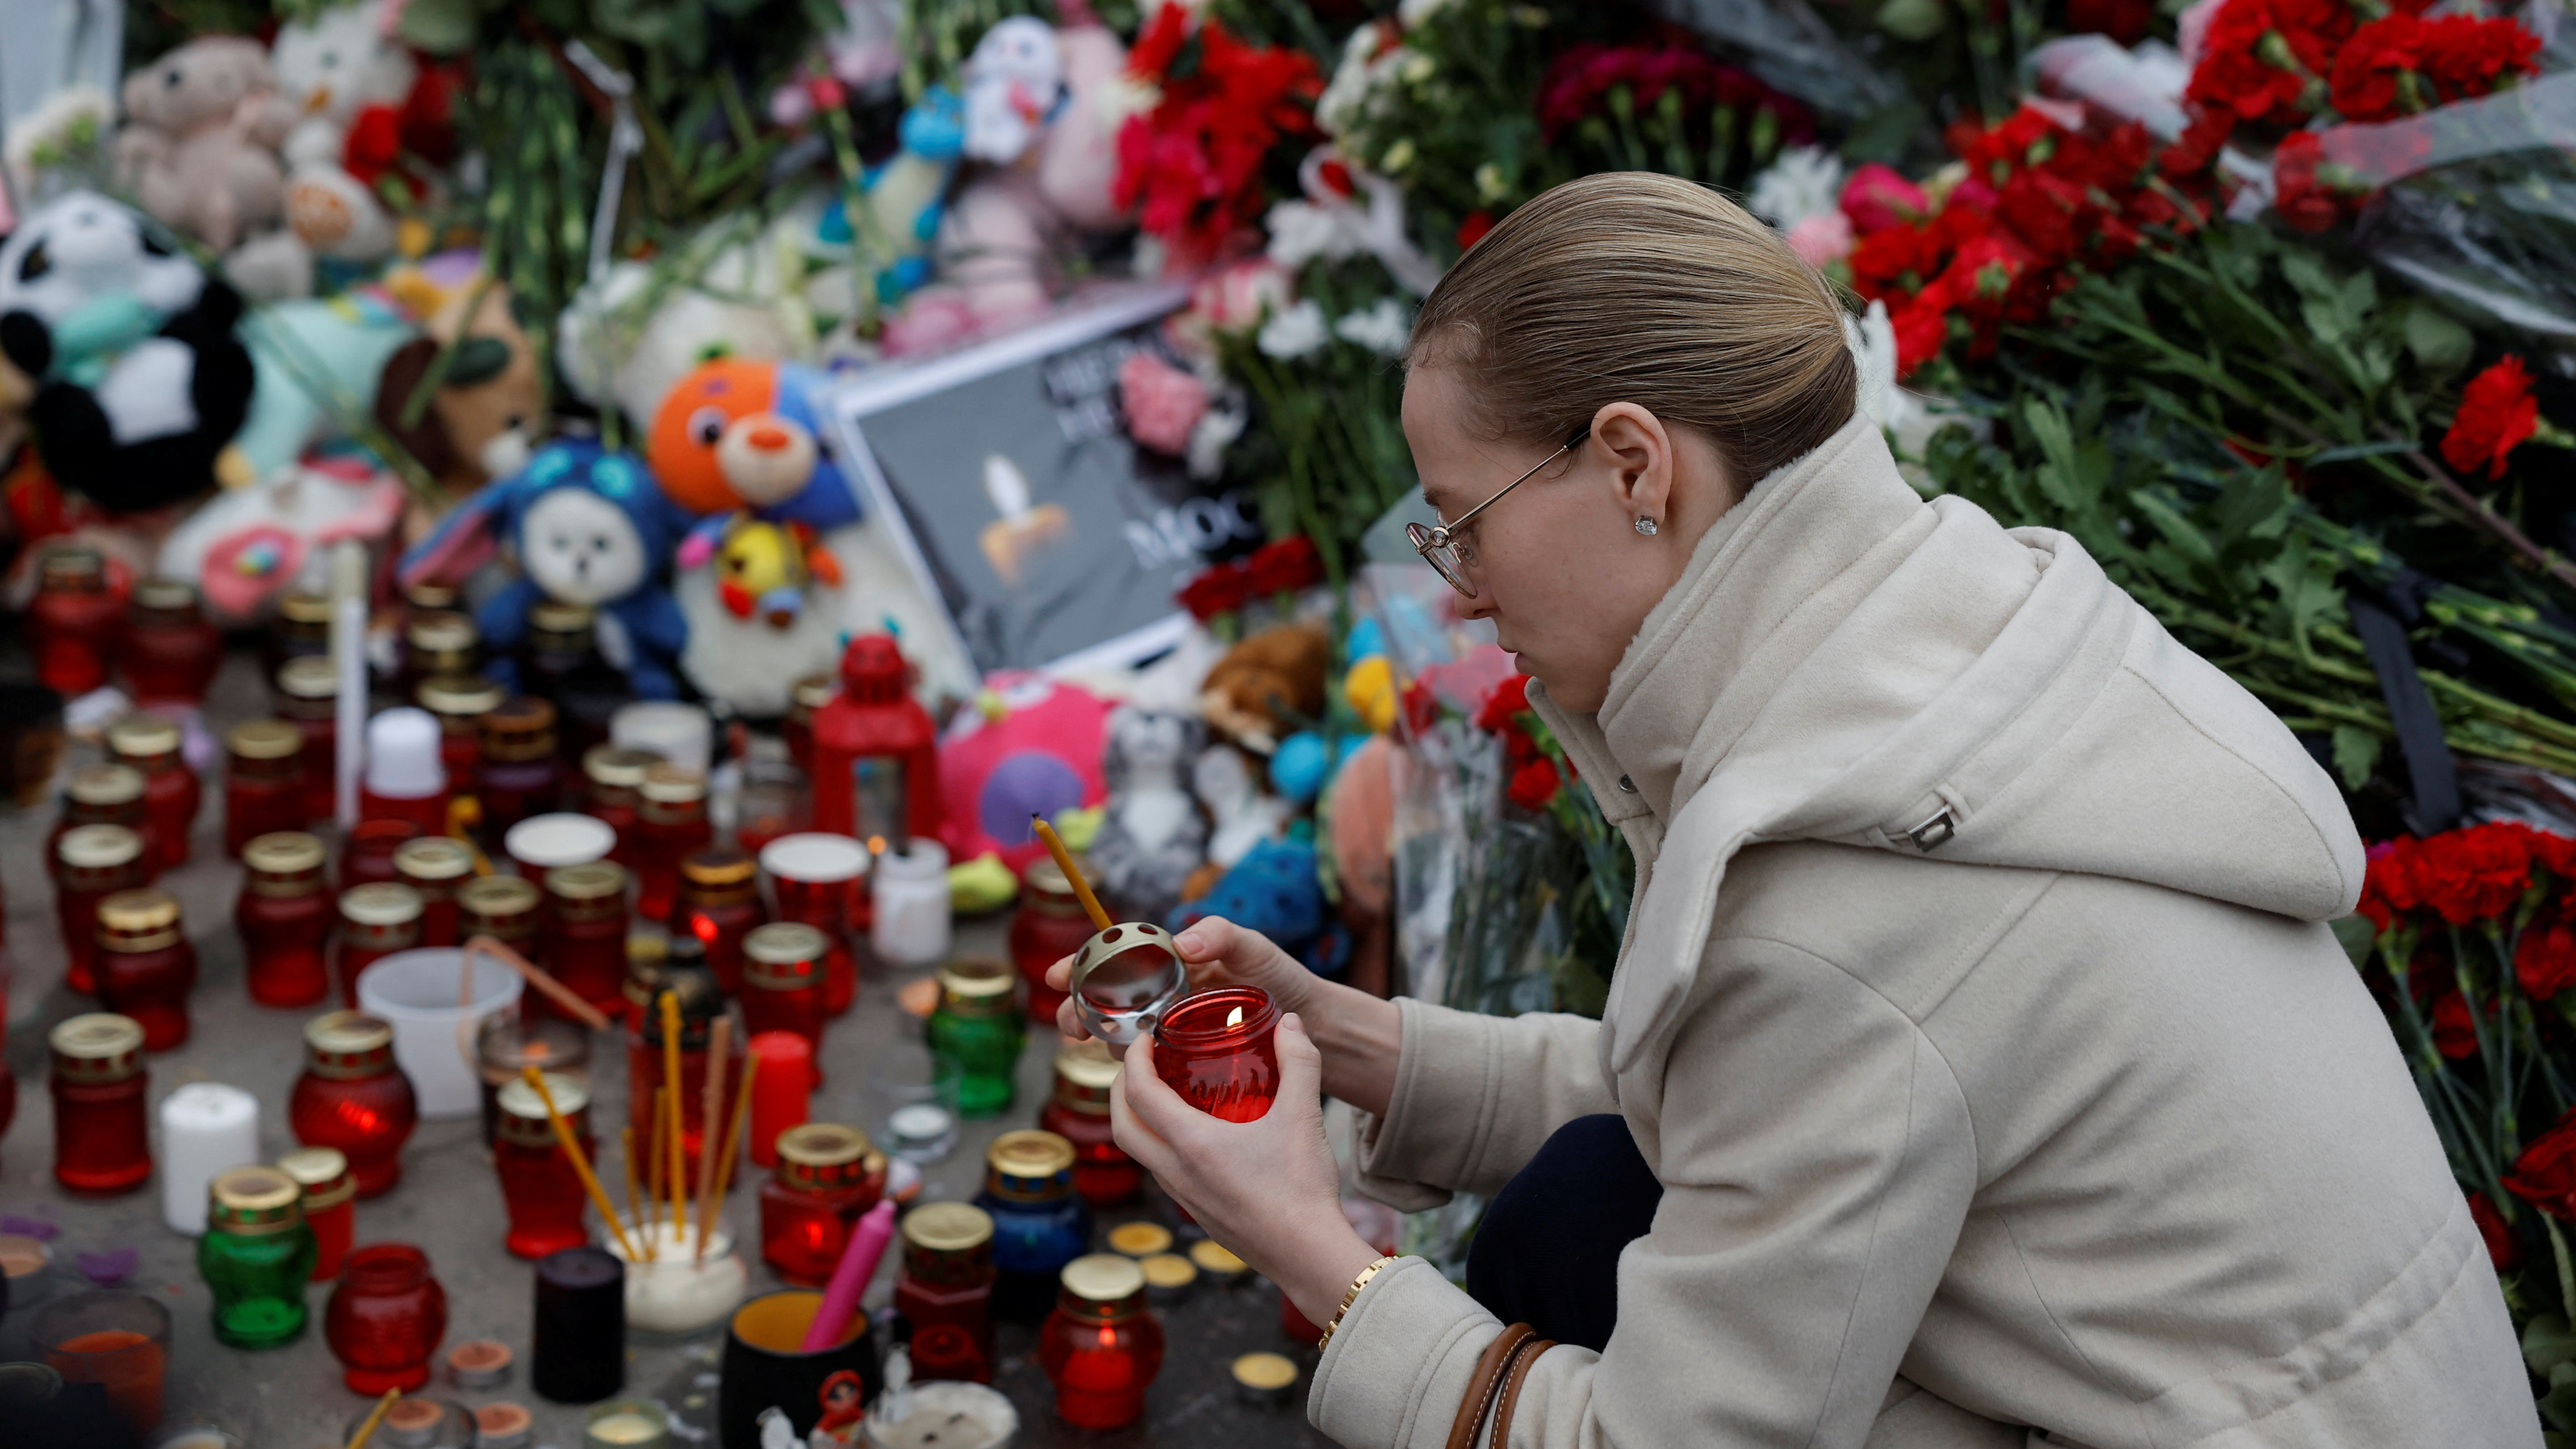 A woman lights a candle at a makeshift memorial to the victims of a shooting attack set up outside the Crocus City Hall concert venue. /Maxim Shemetov/Reuters